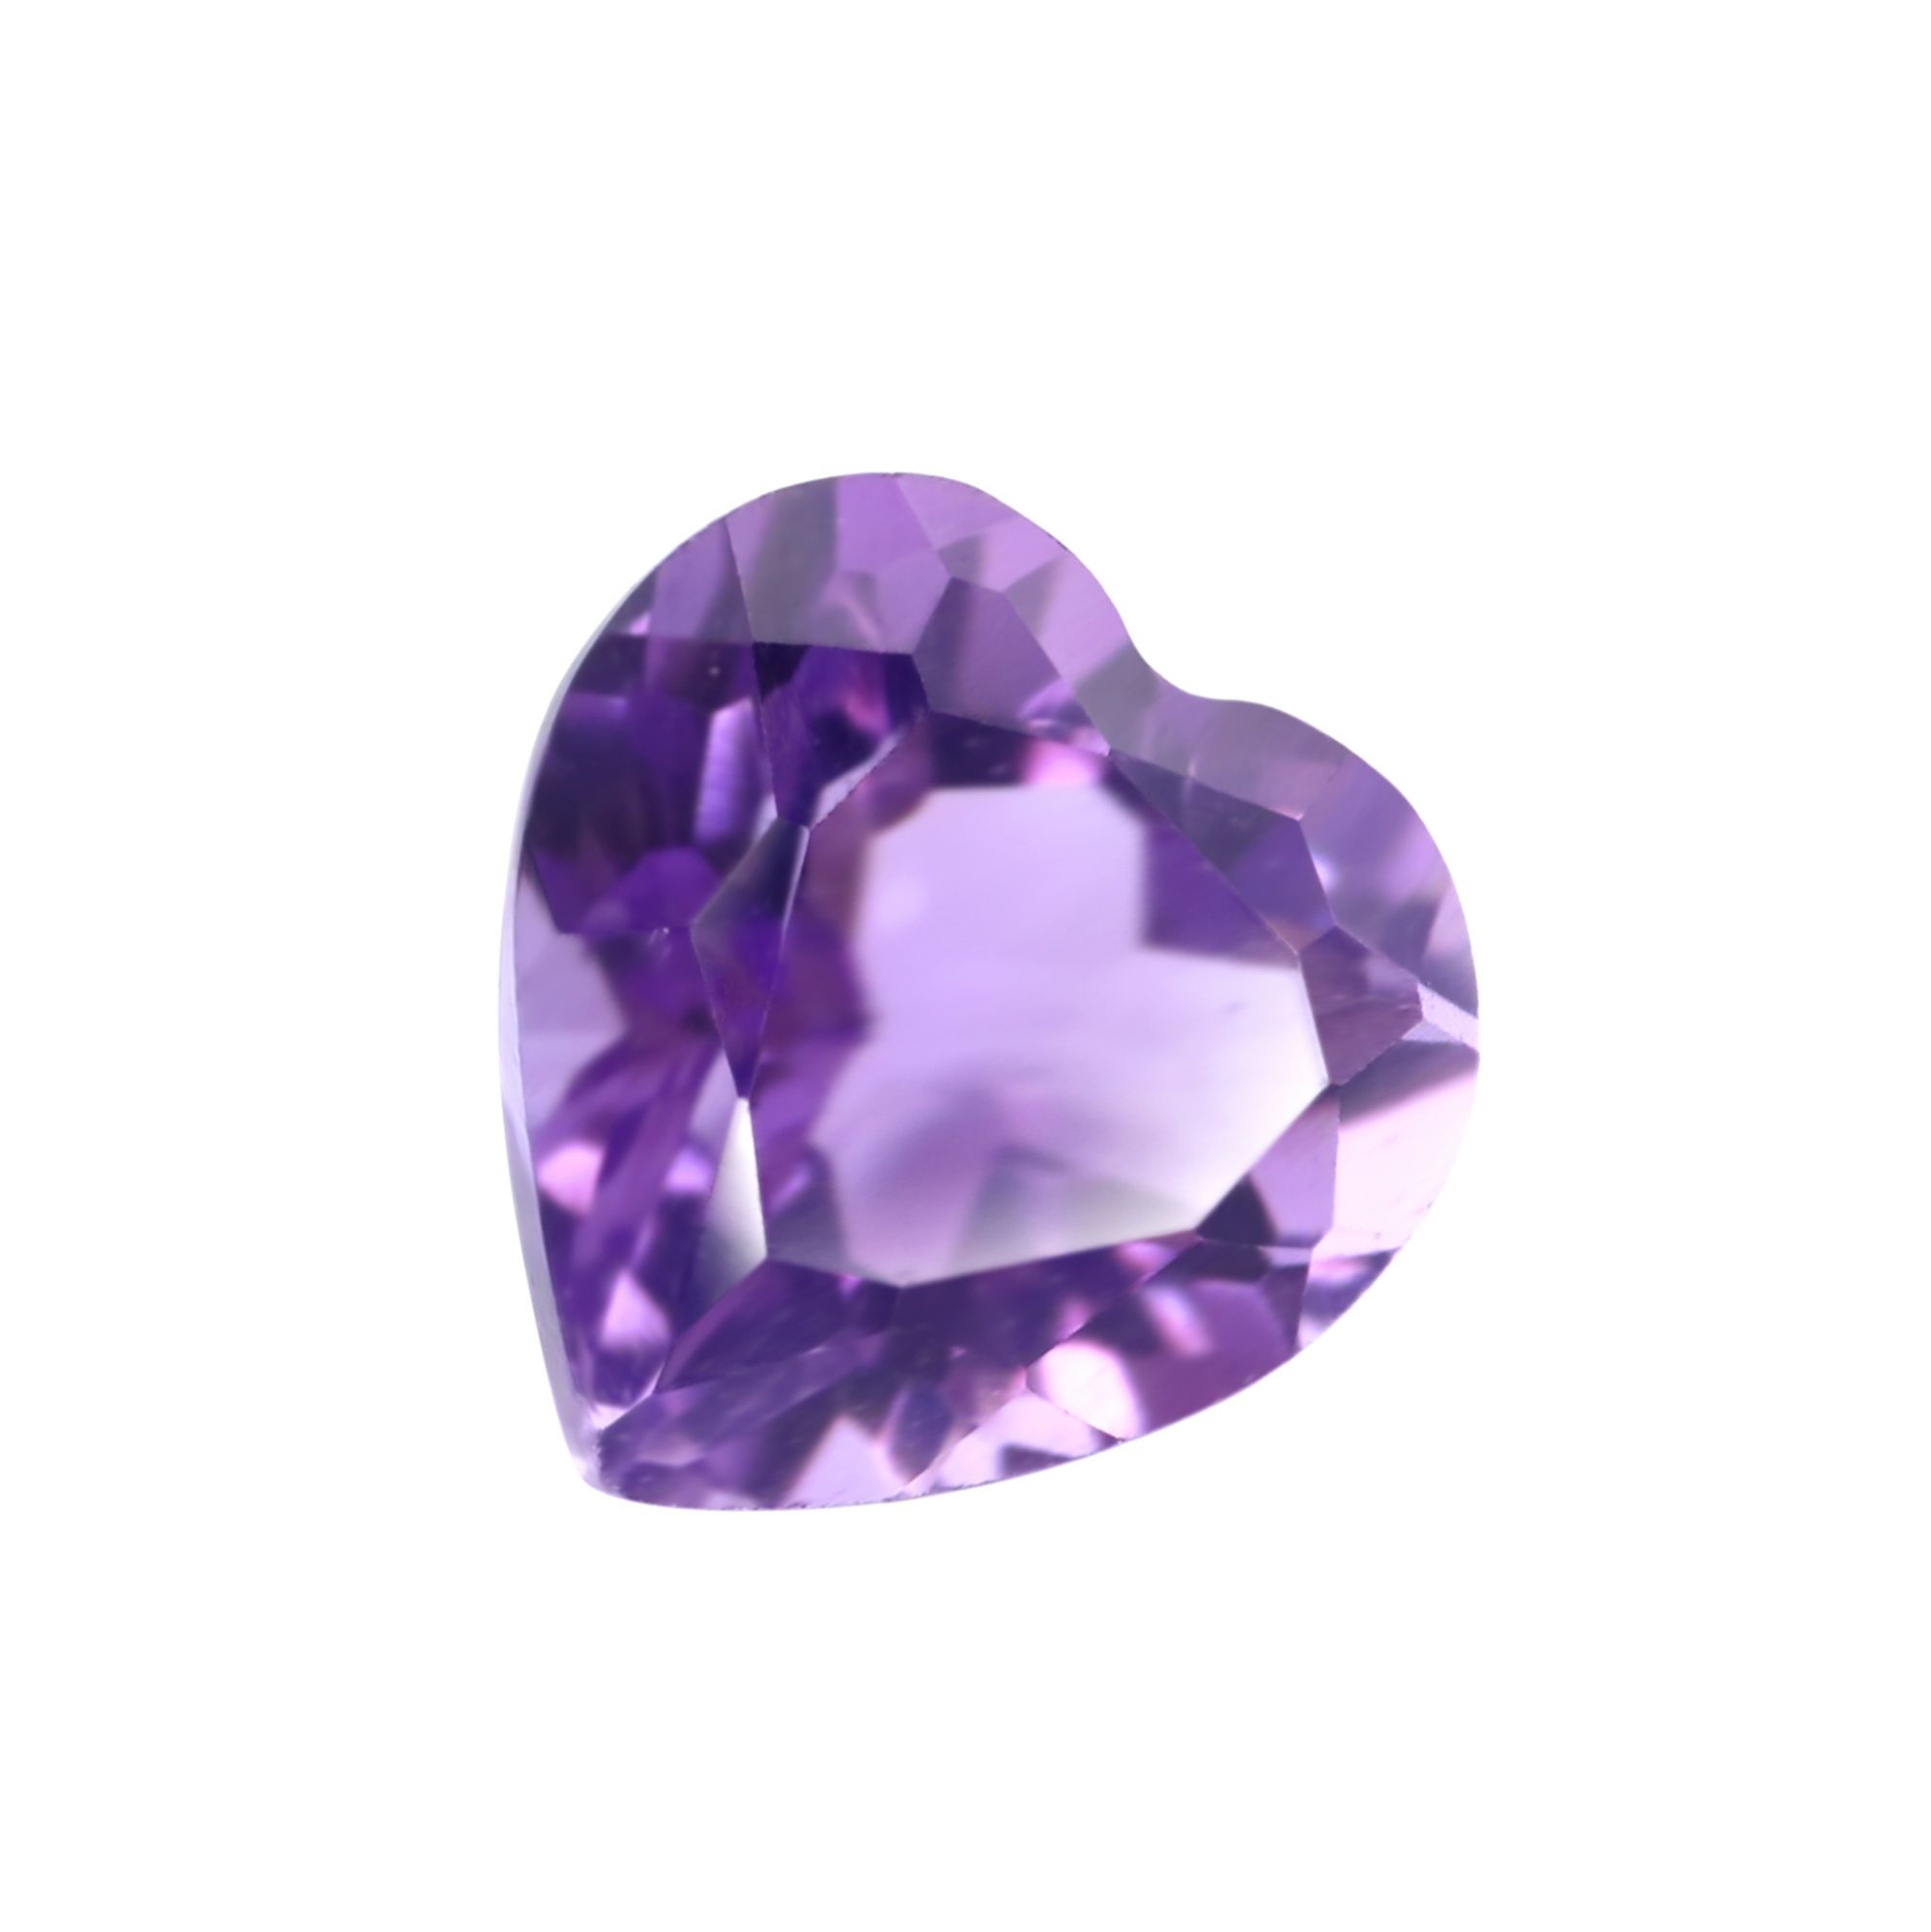 1Pcs Heart Purple Amethyst February Birthstone Faceted Cut Loose Gemstone Nature Semi Precious Stone DIY Jewelry Supplies 4130015 - Click Image to Close